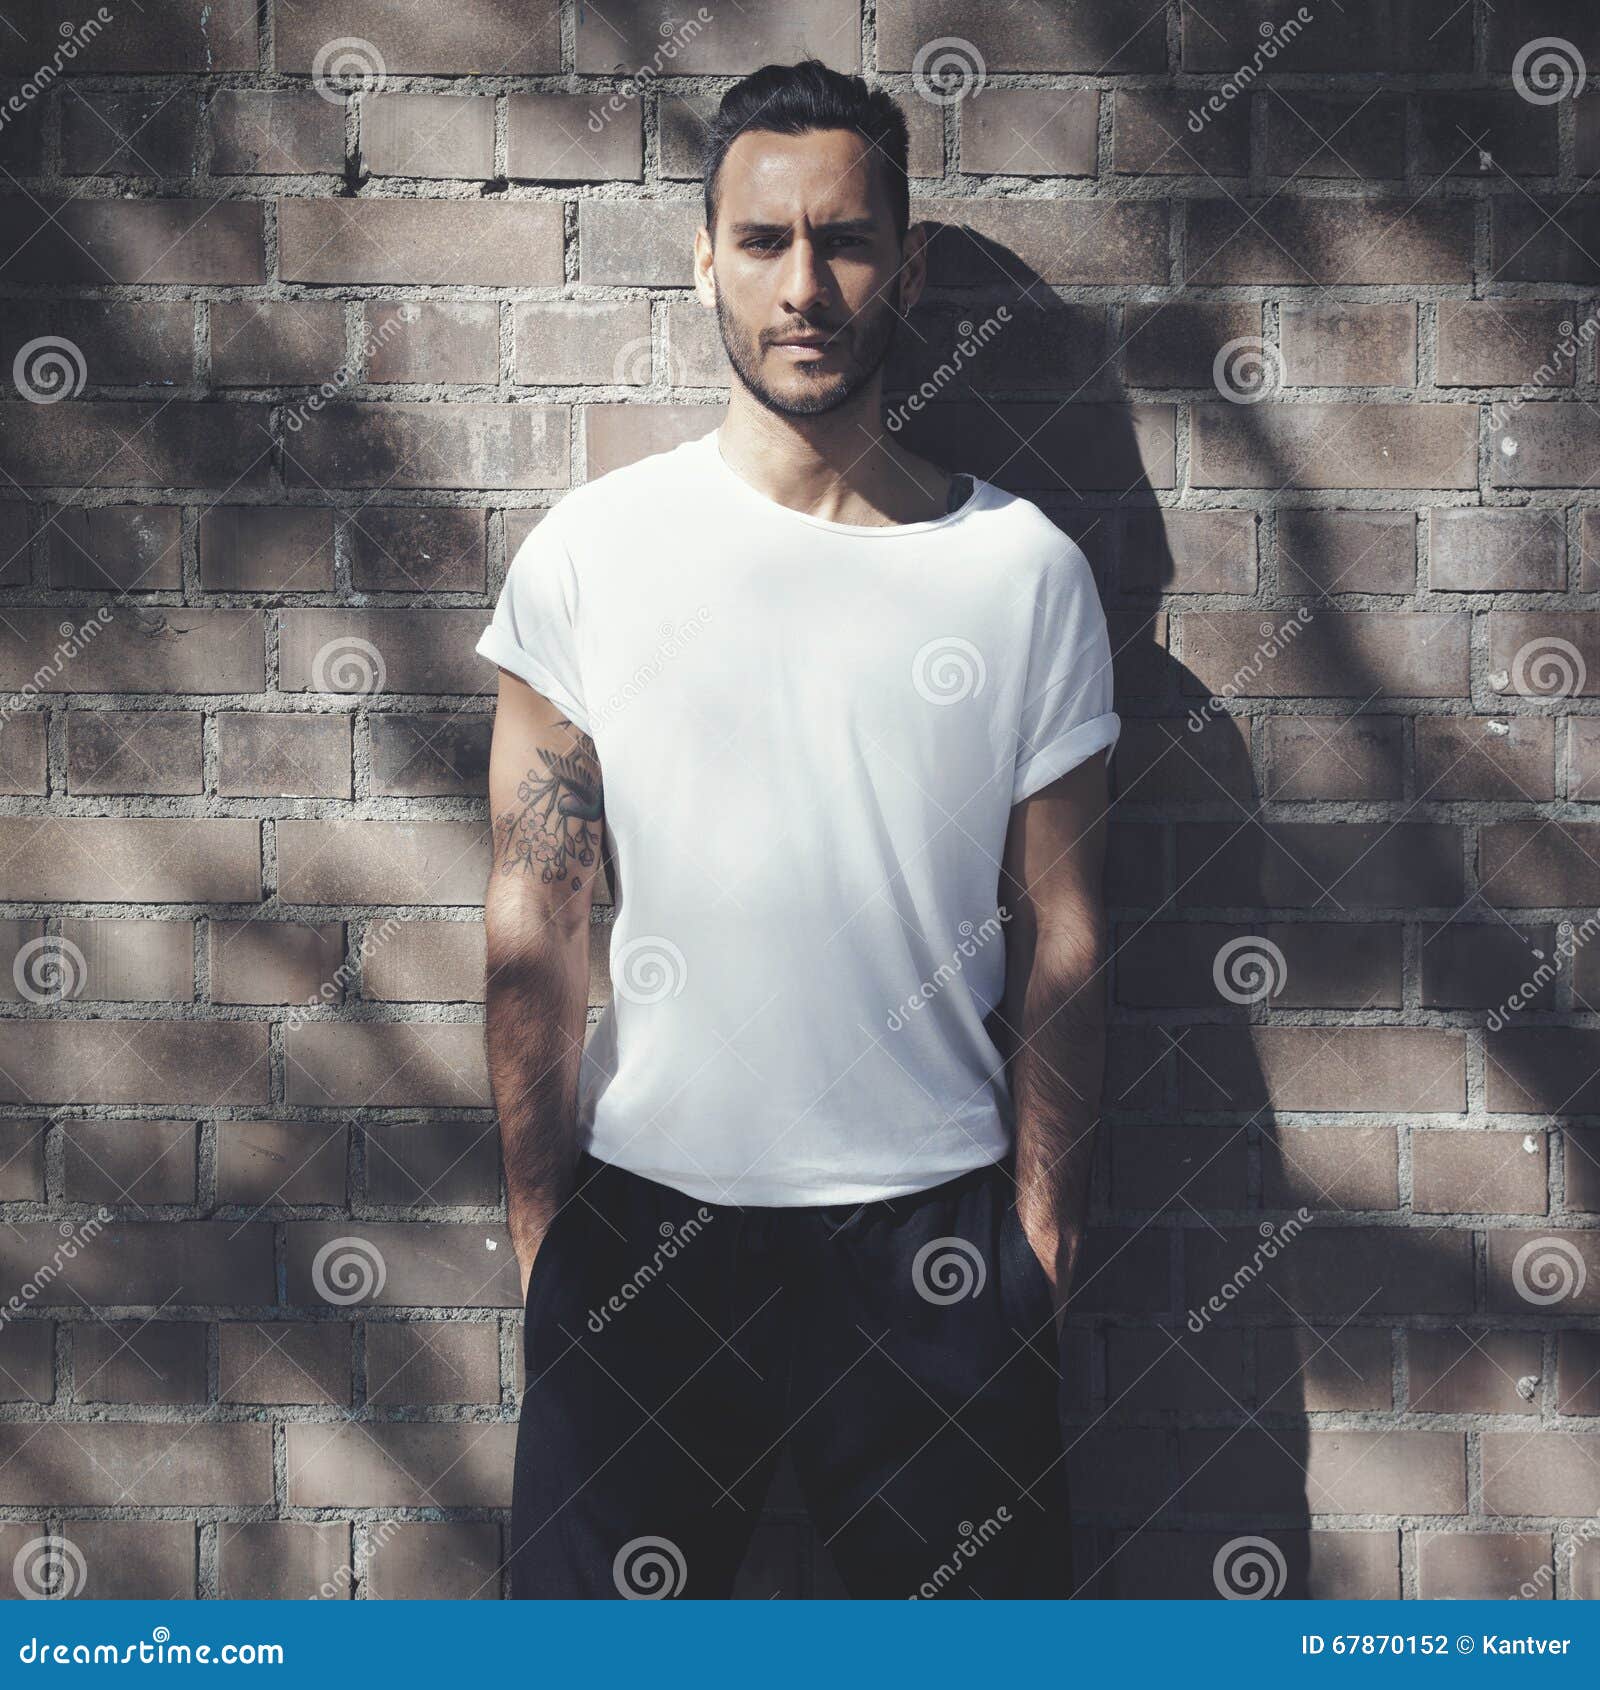 portrait bearded man with tattoo wearing blank white tshirt and black jeans. bricks wall background. vertical mockup